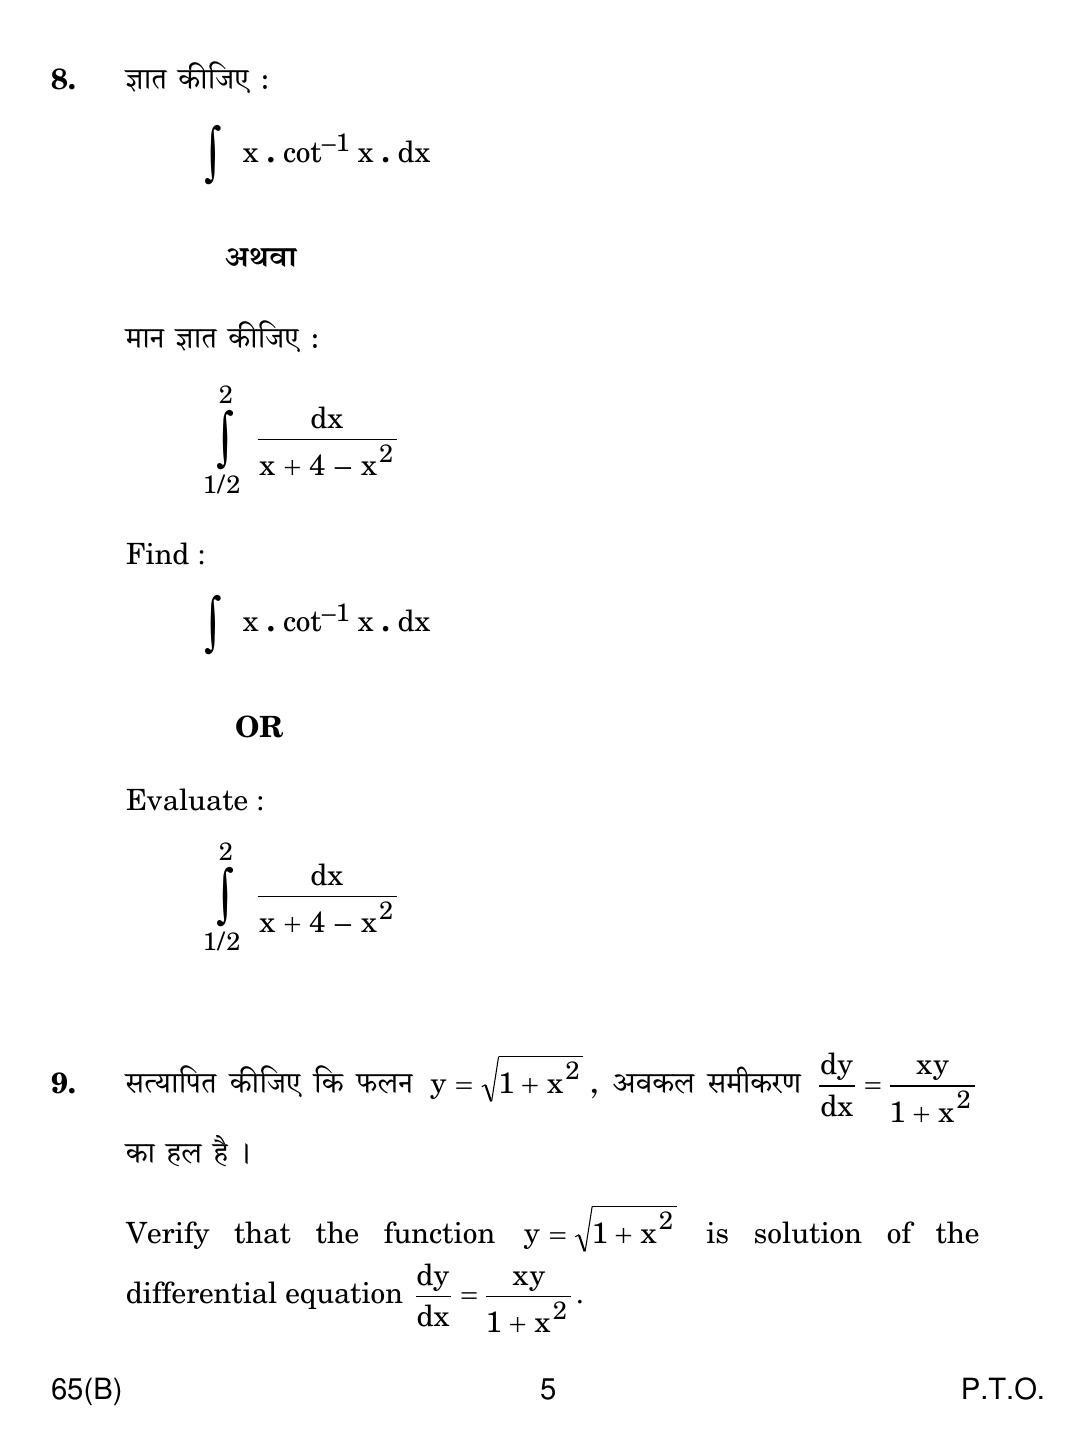 CBSE Class 12 65(B) MATHS For Blind Candidates 2019 Compartment Question Paper - Page 5